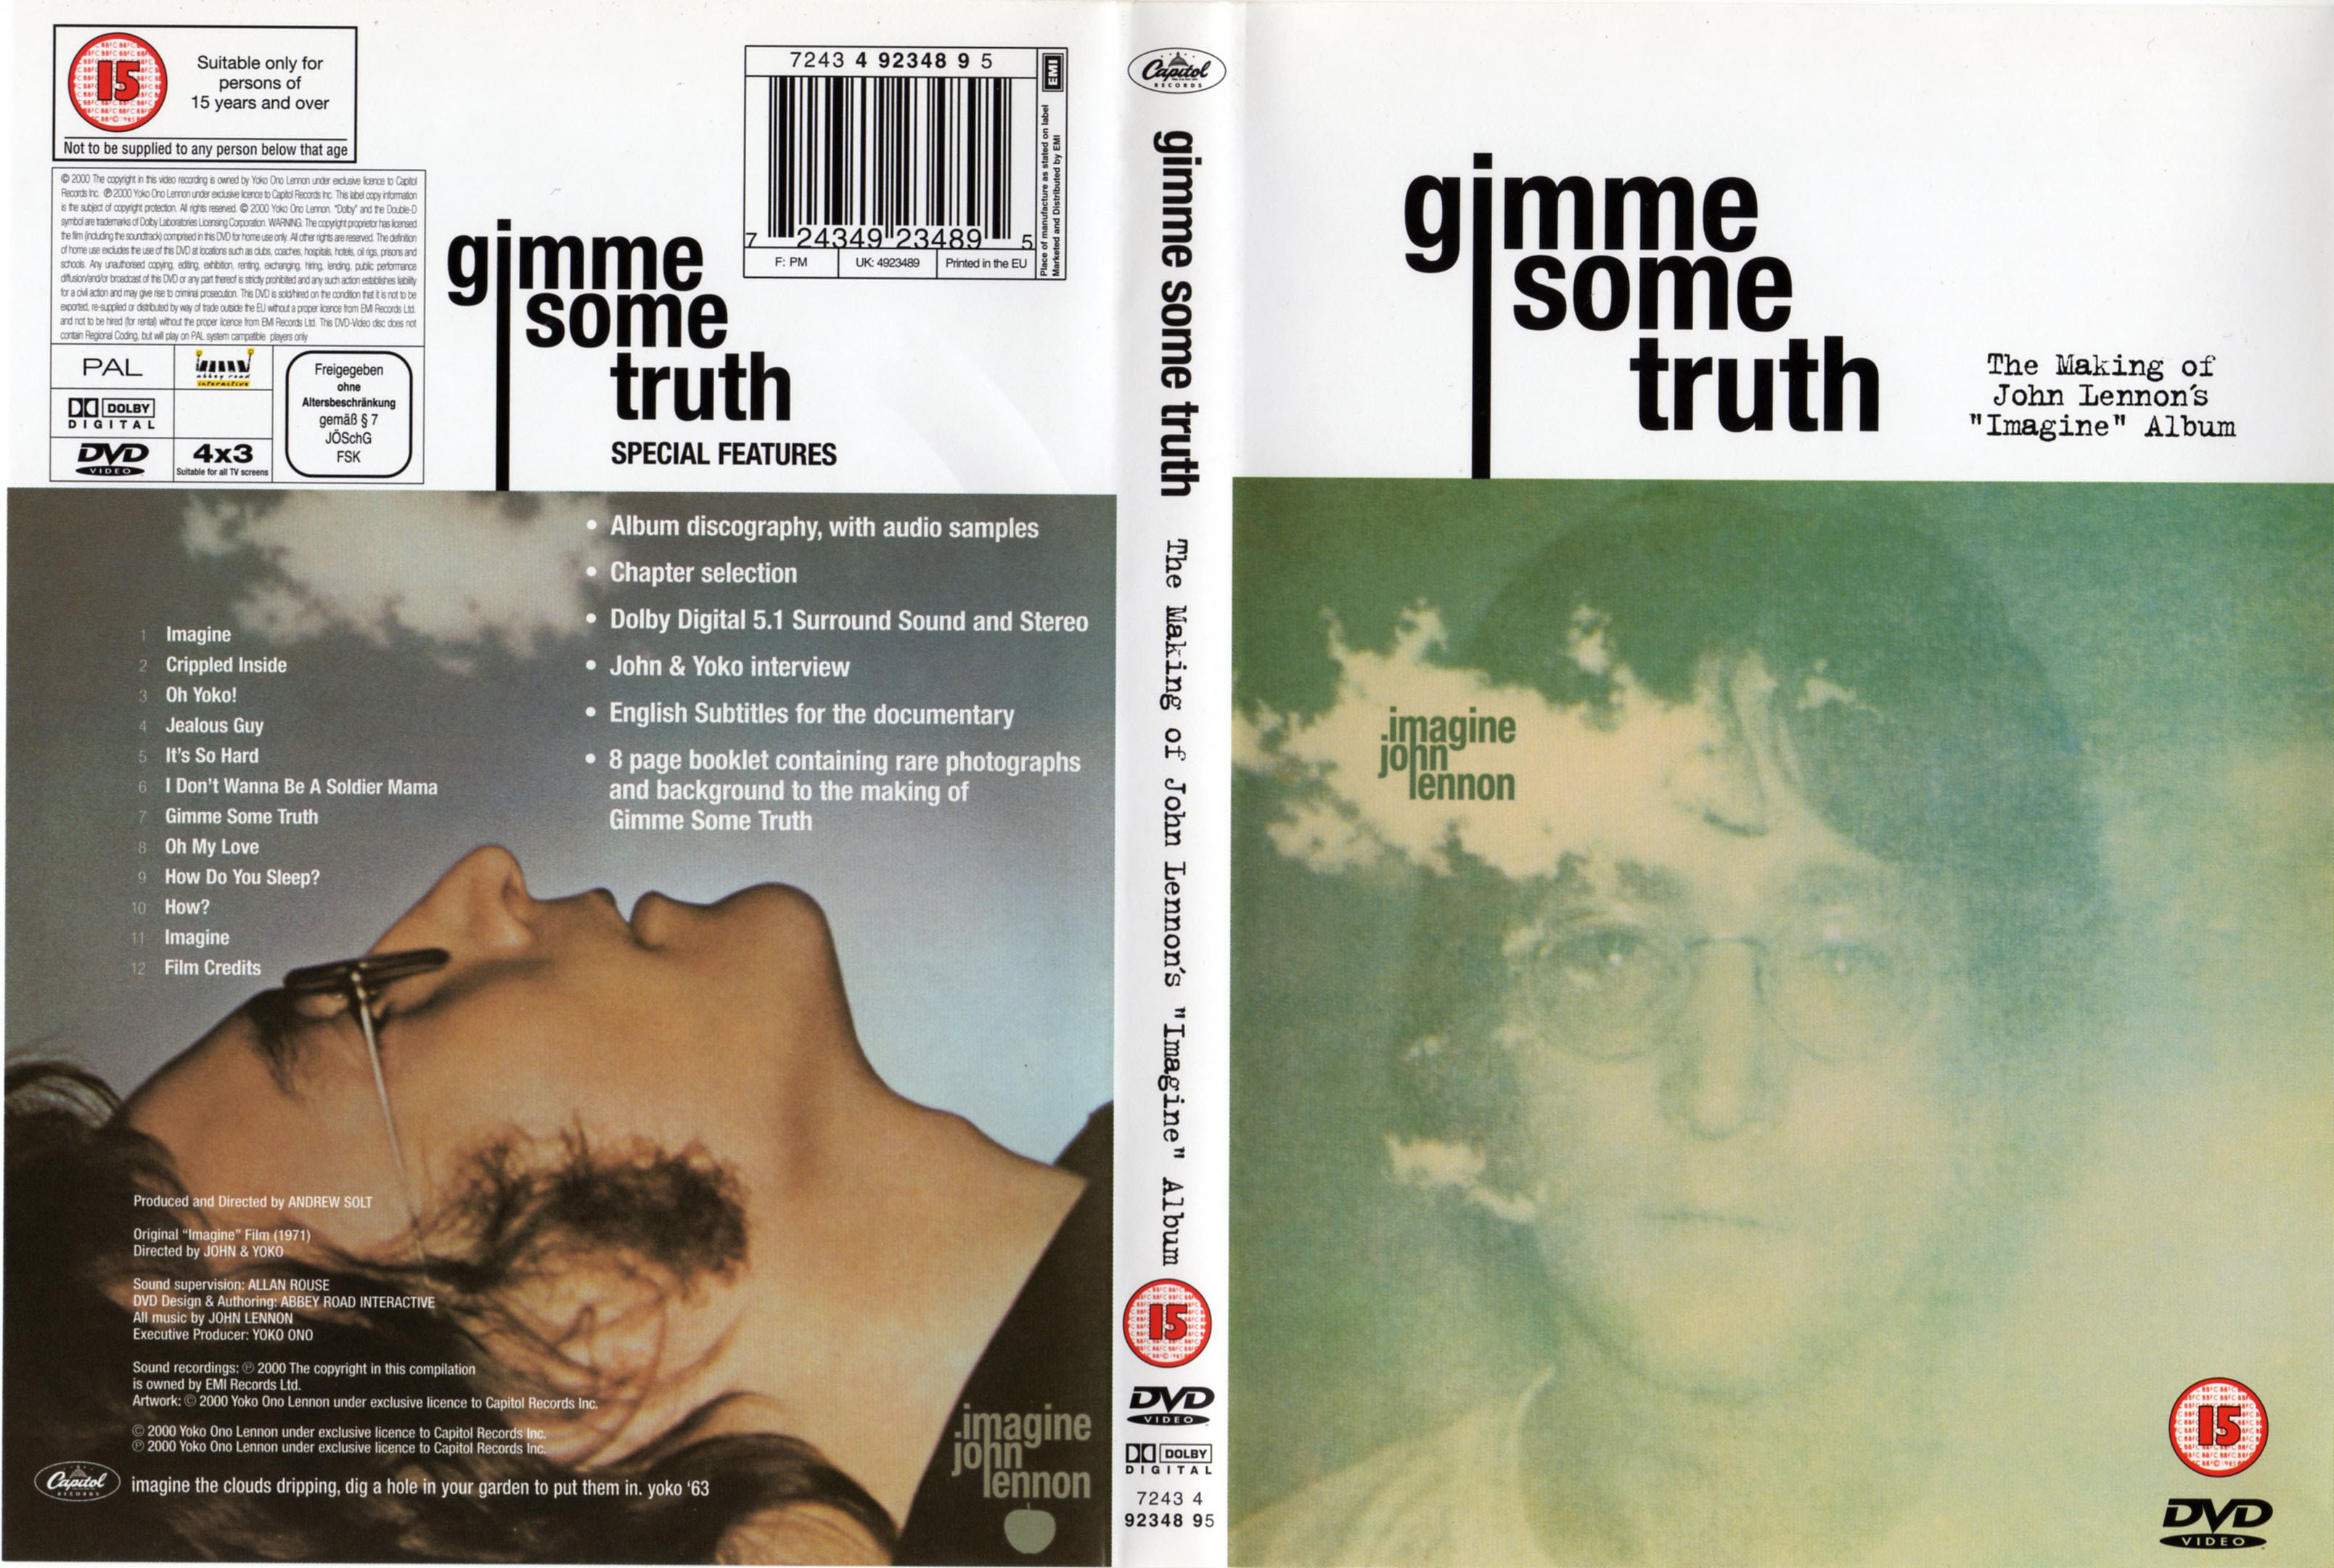 Jaquette DVD Gimme some truth